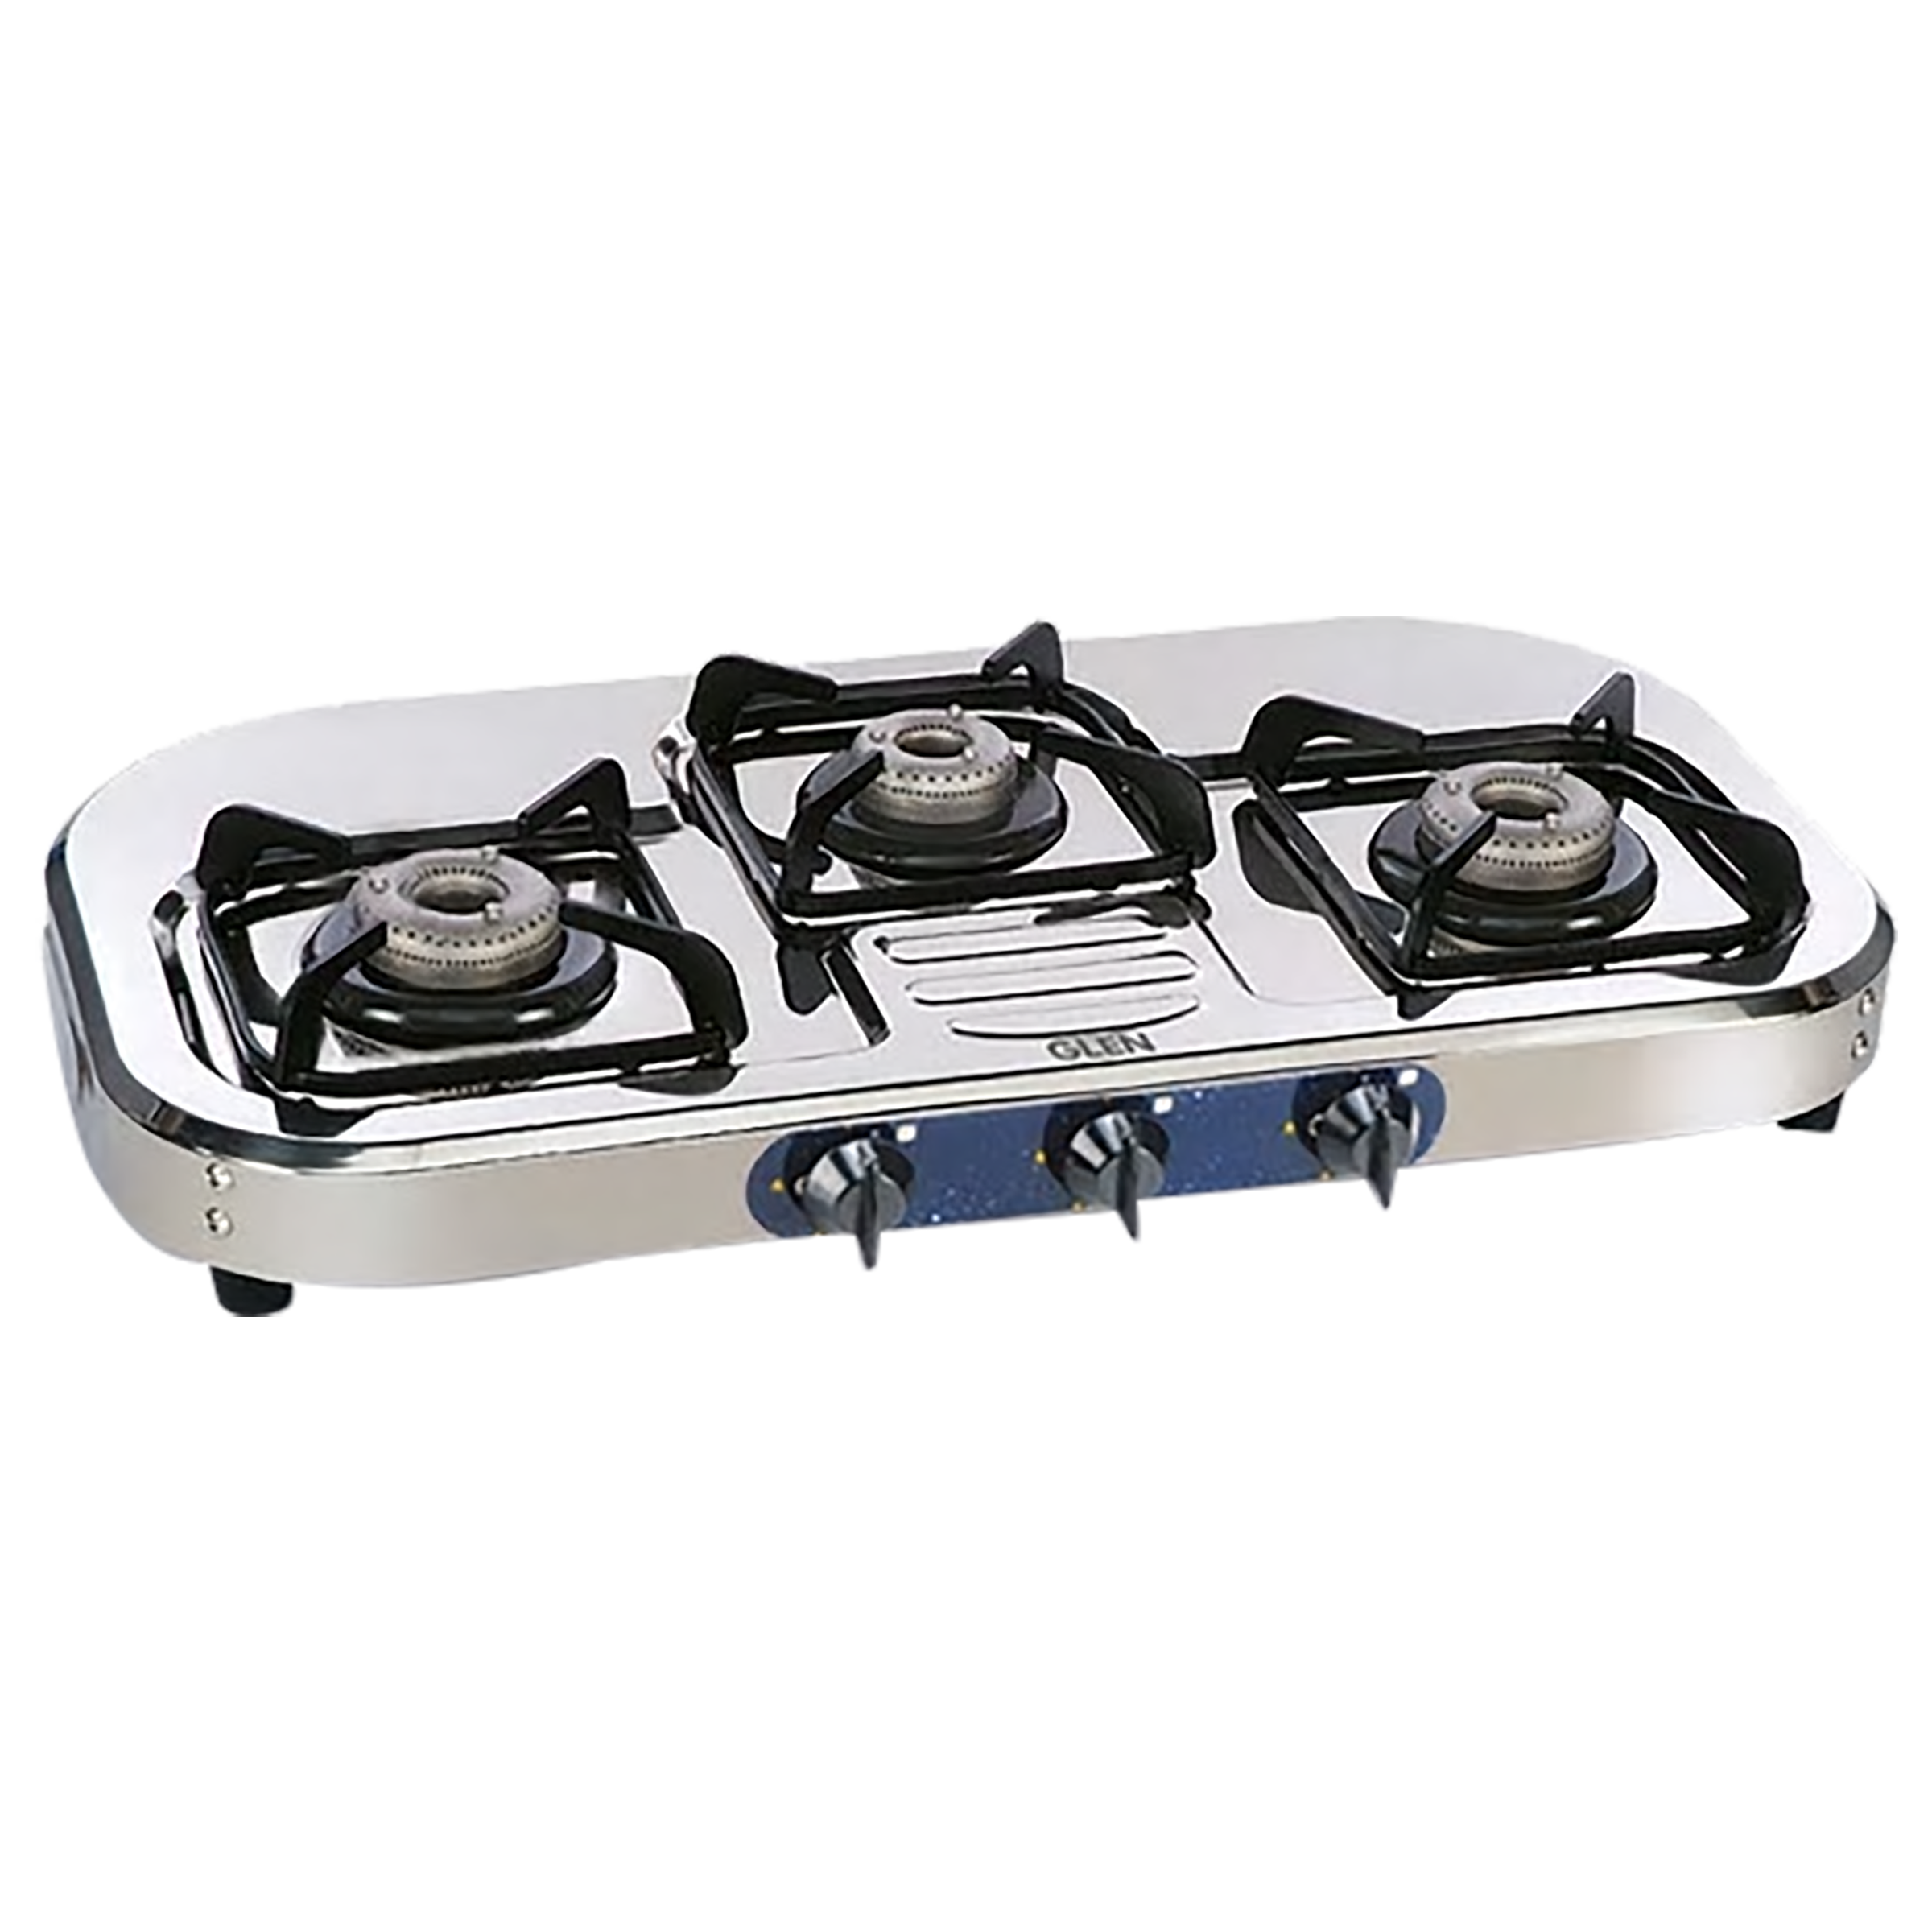 Glen CT1037SSAL 3 Burner Stainless Steel Gas Stove (Maximum Cooking Space, Silver)_1